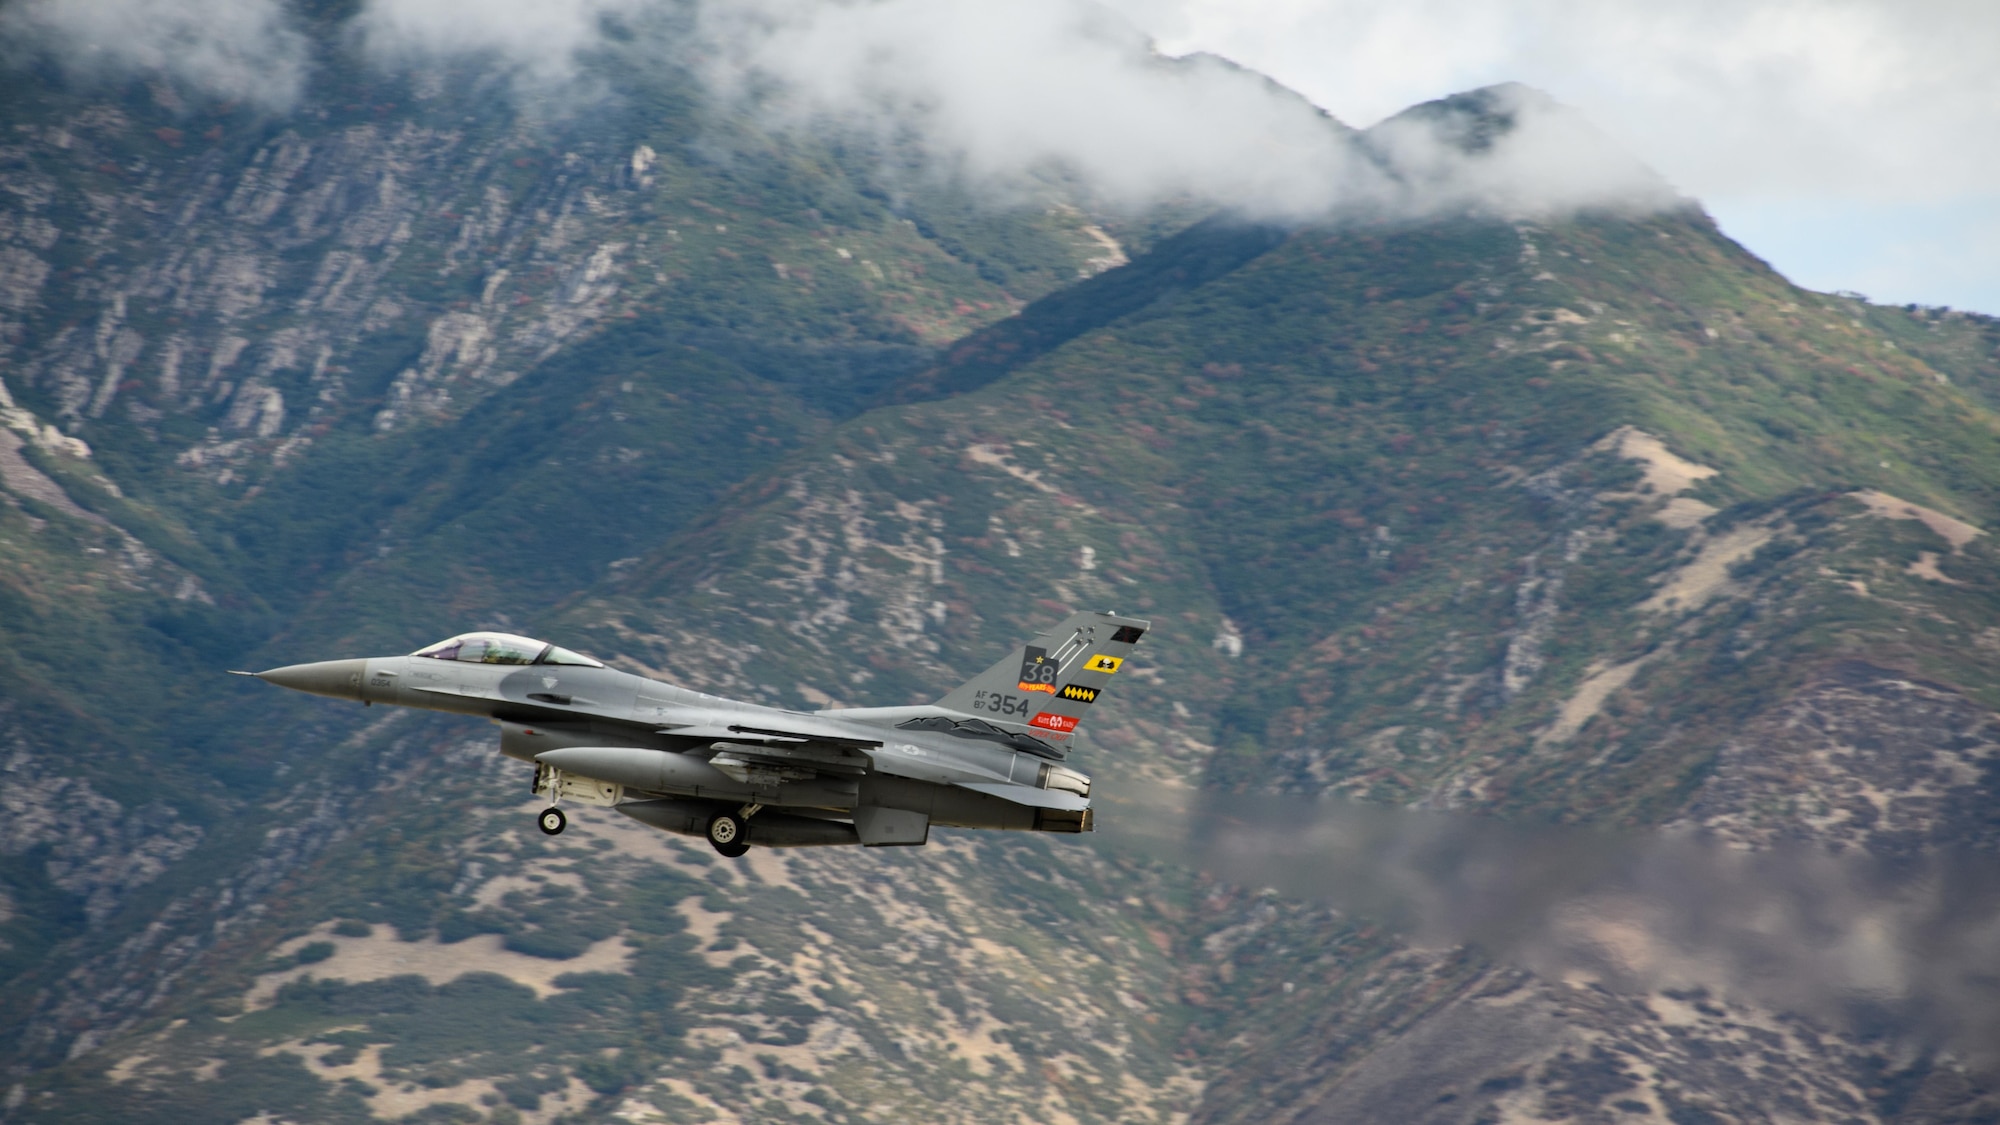 The last six operational F-16 Fighting Falcon aircraft lifted off from the runway here Sept. 21 at approximately 11 a.m. on their way to Holloman AFB, New Mexico, where they will continue flying.